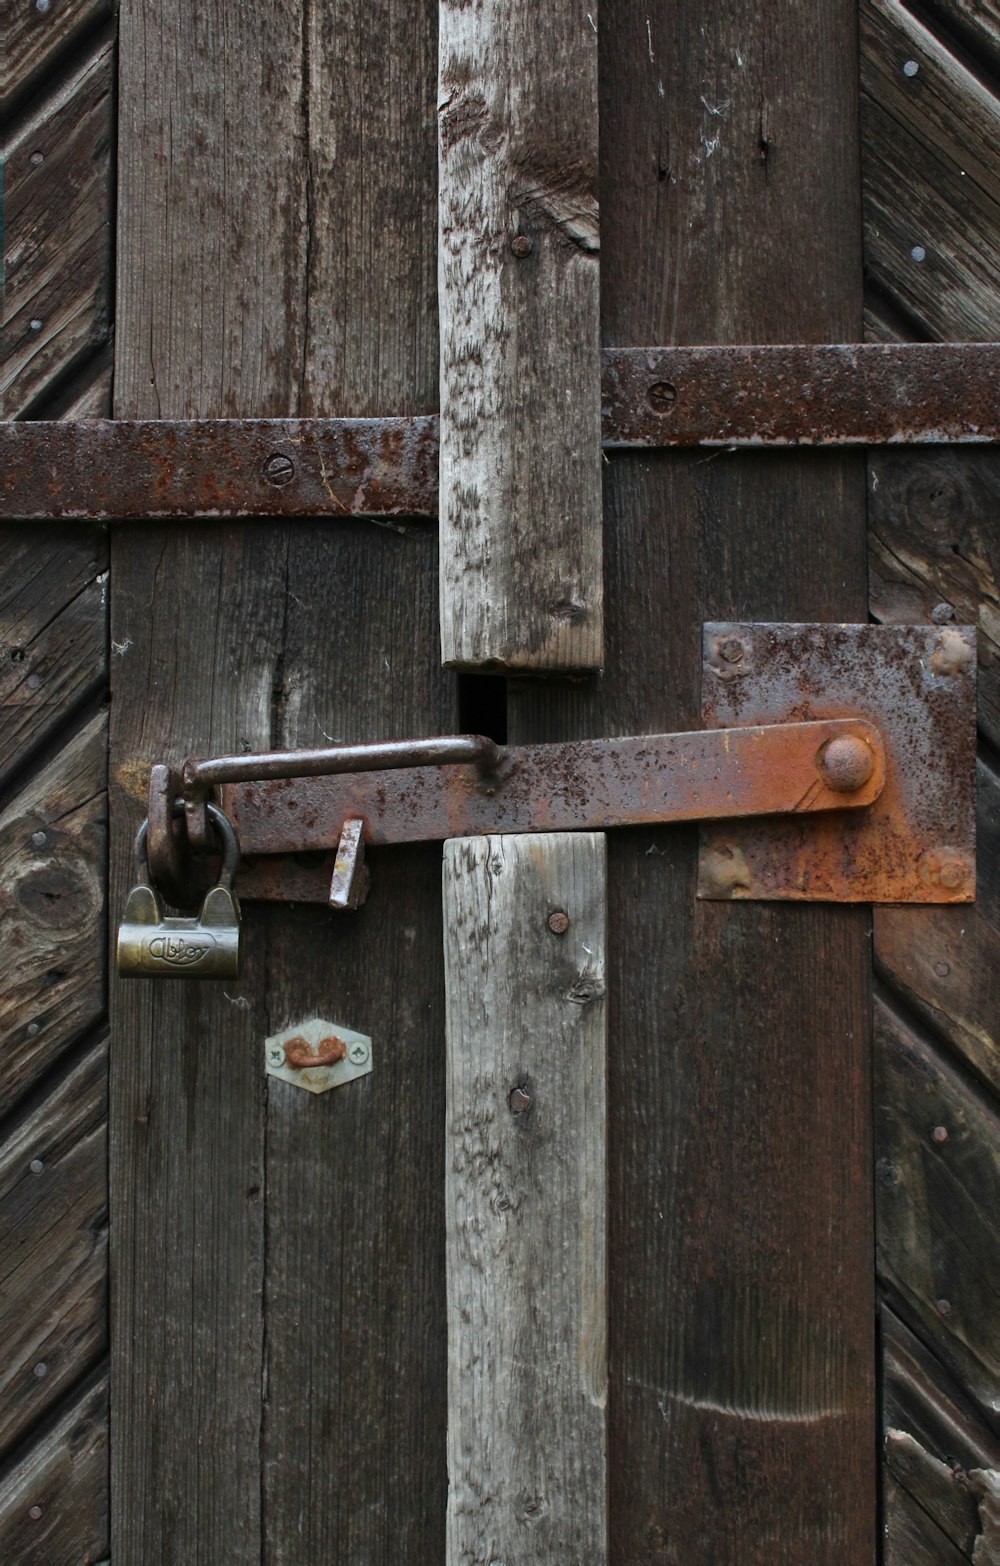 padlock on brown wooden fence